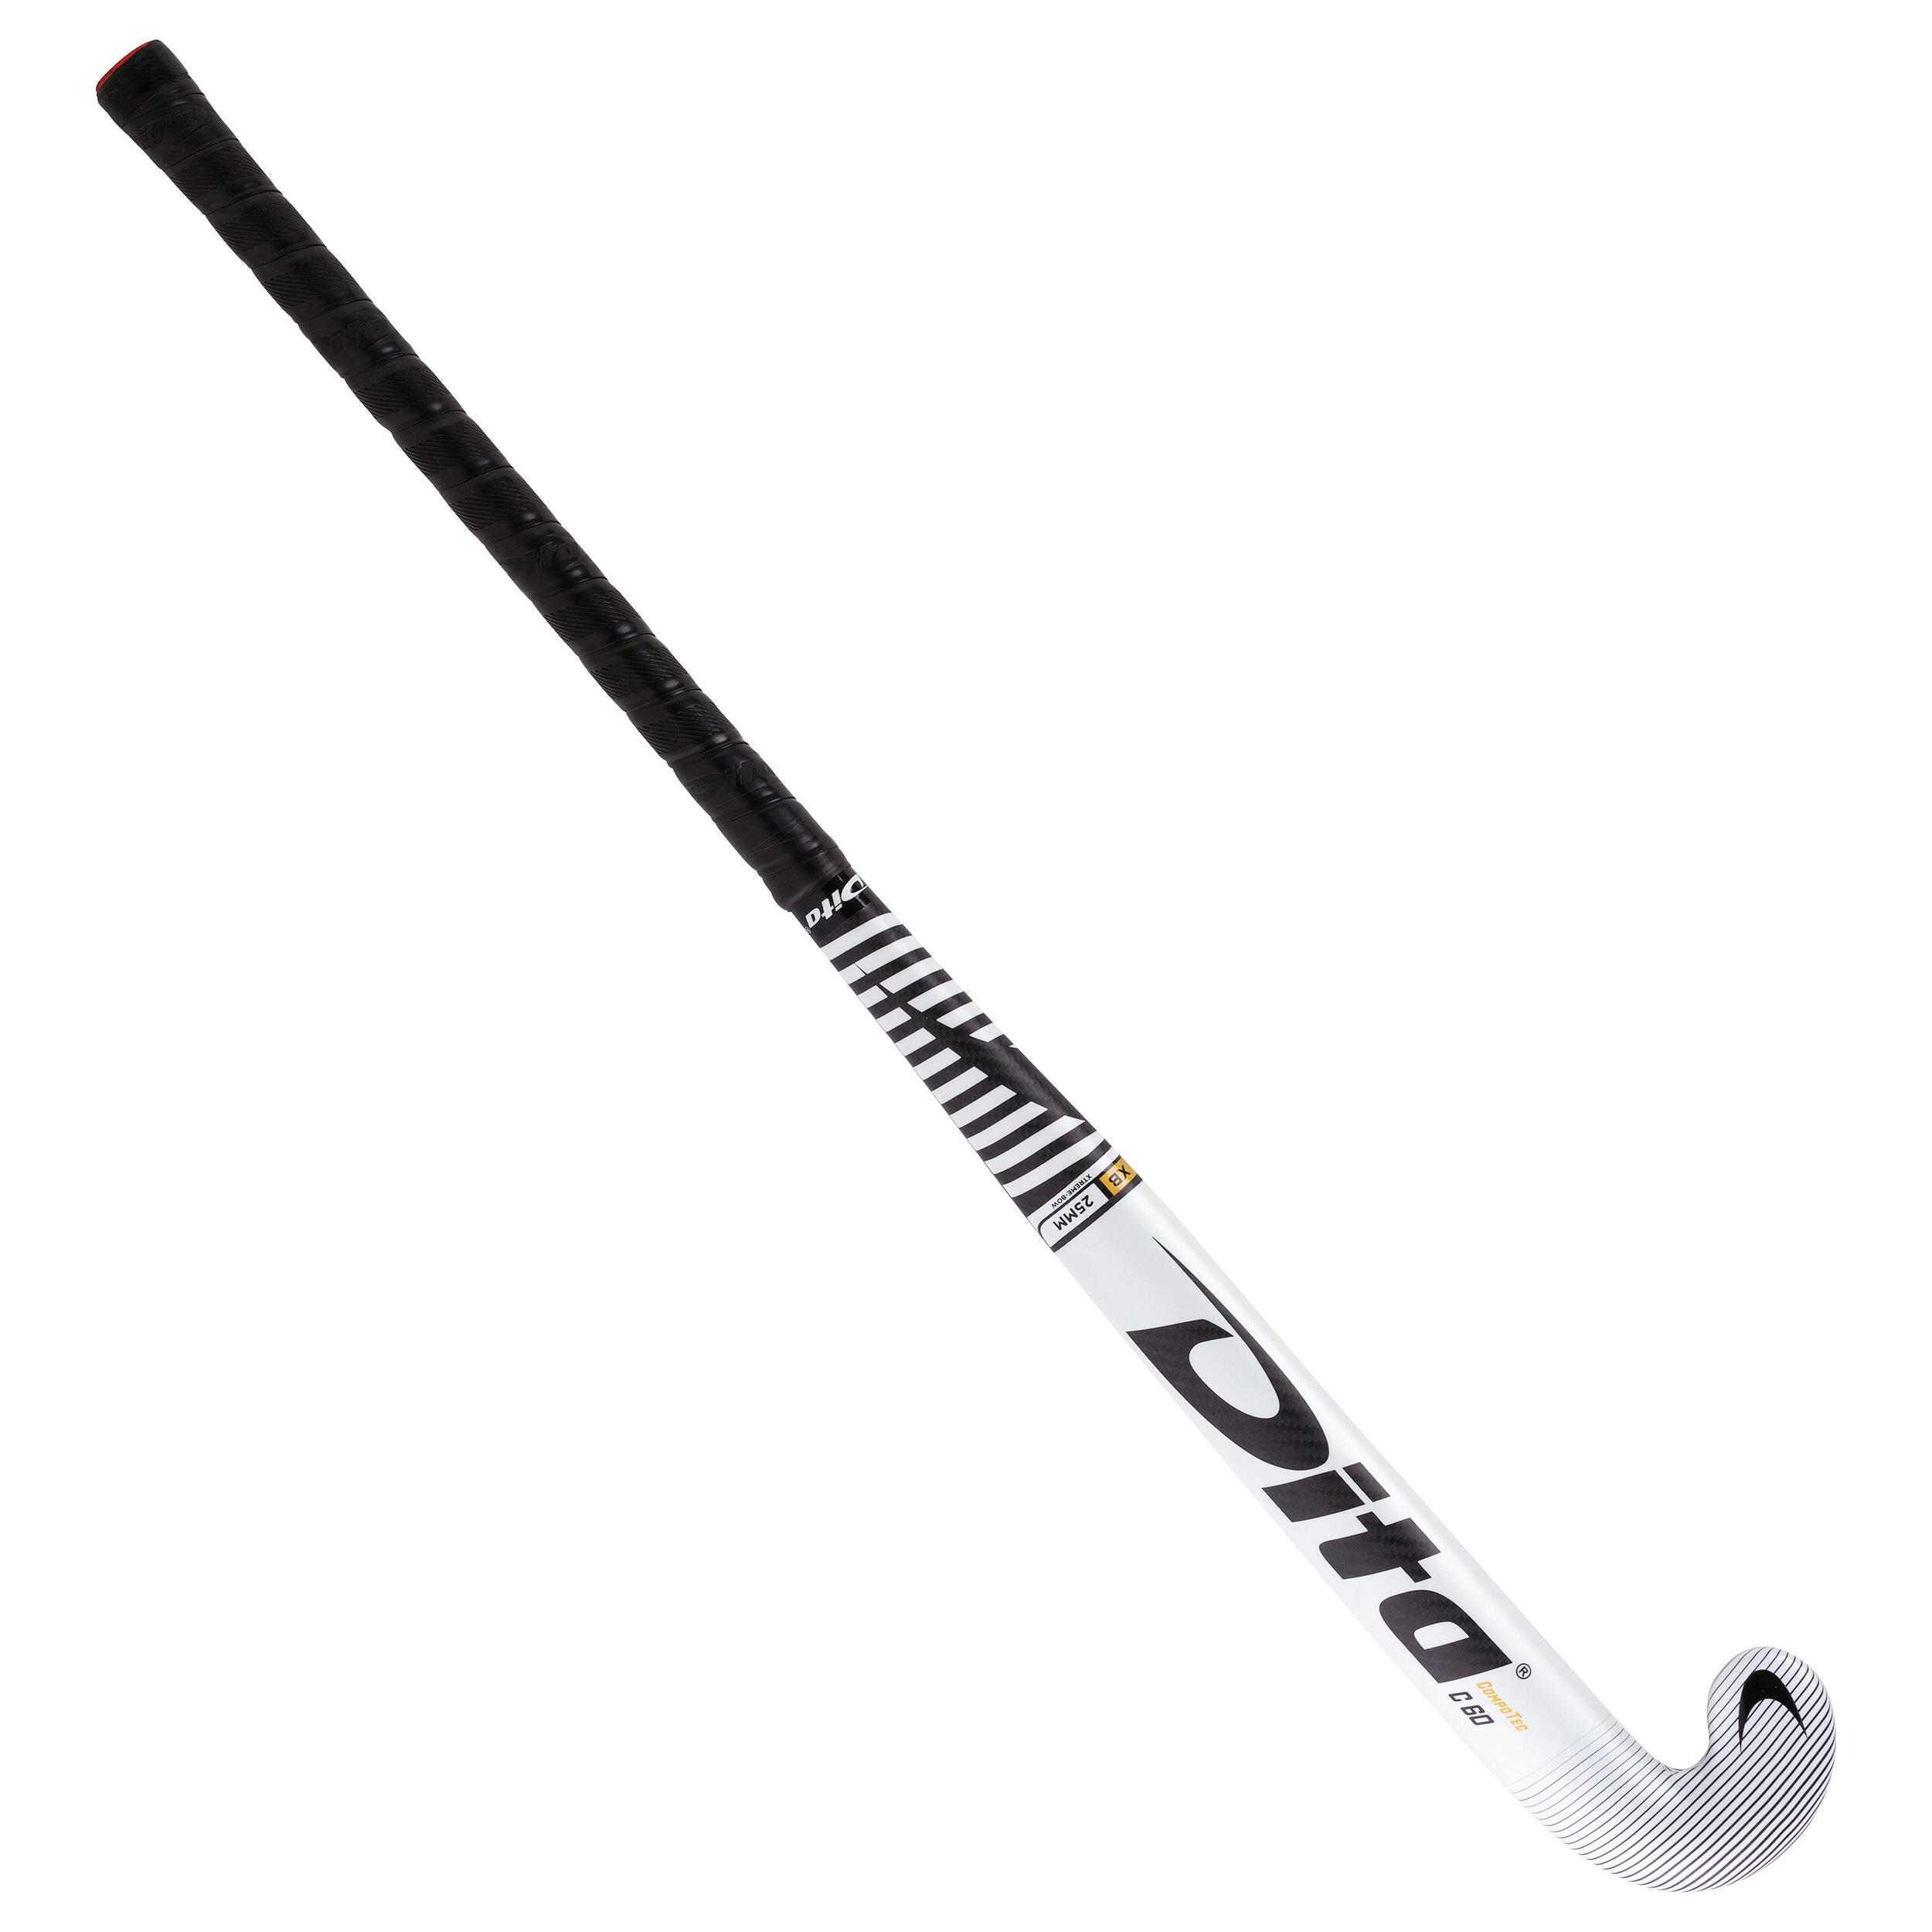 Adult Field Hockey Advanced 60% Carbon X-Low Bow Stick CompotecC60 - White/Black 8/12